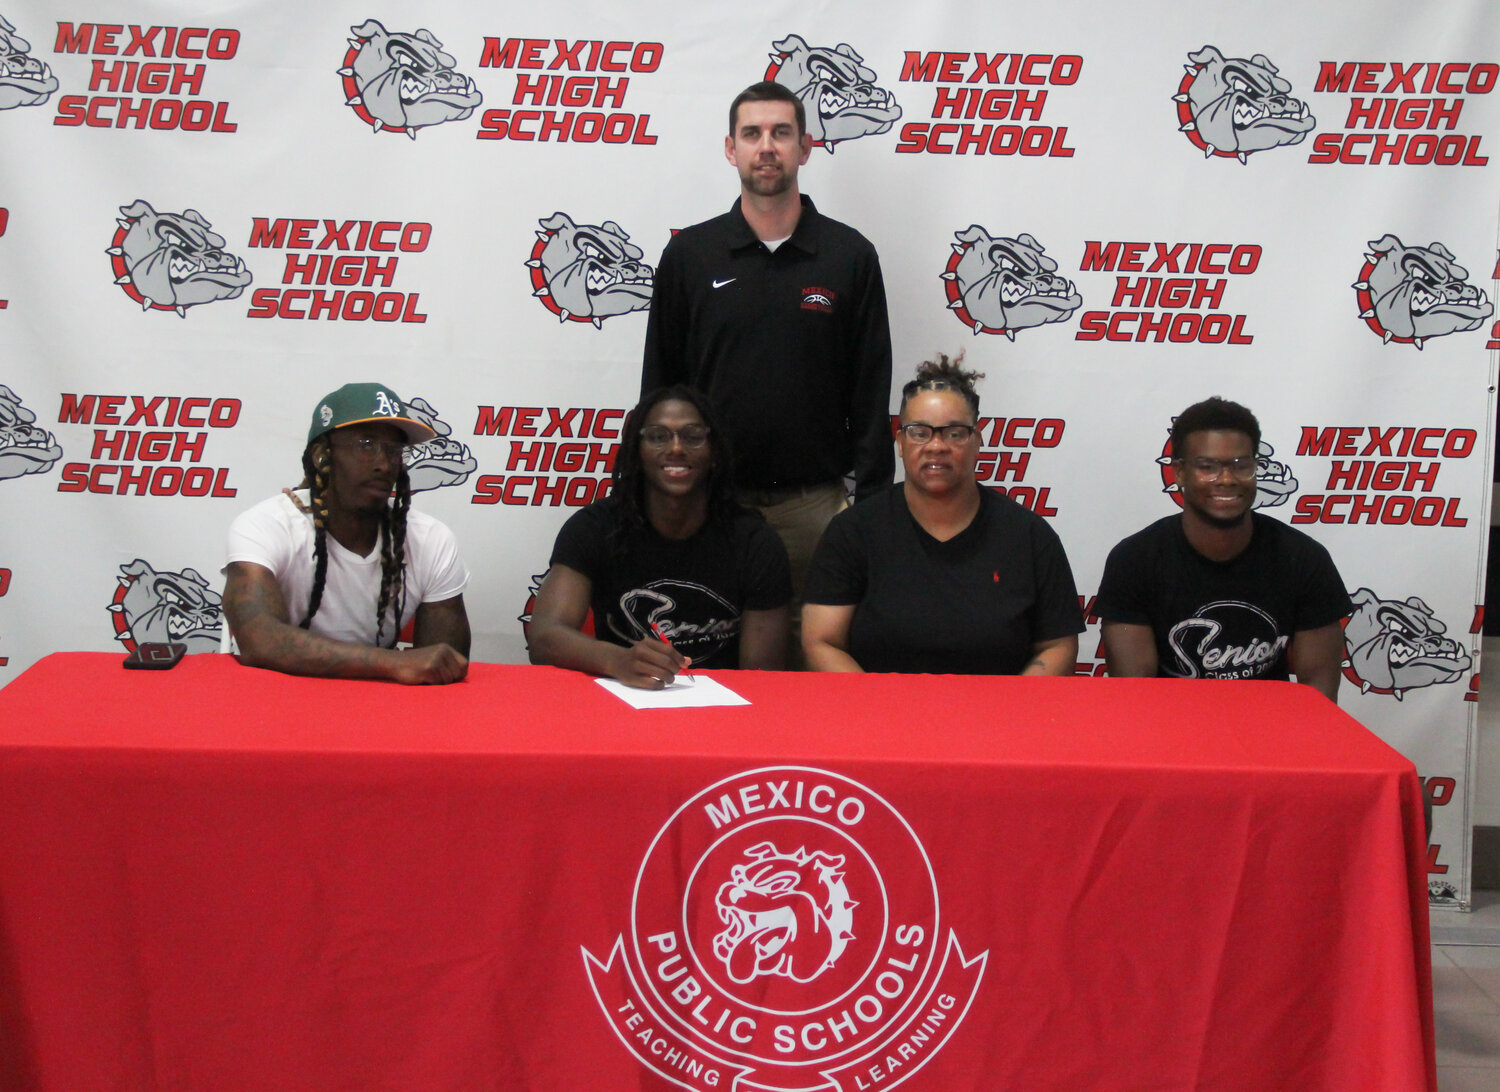 Mexico senior Jordan Shelton made it official on Thursday at the Mexico Sports Complex that he would play college basketball for John Wood Community College in Quincy as he was surrounded by family and his head coach Darren Pappas.